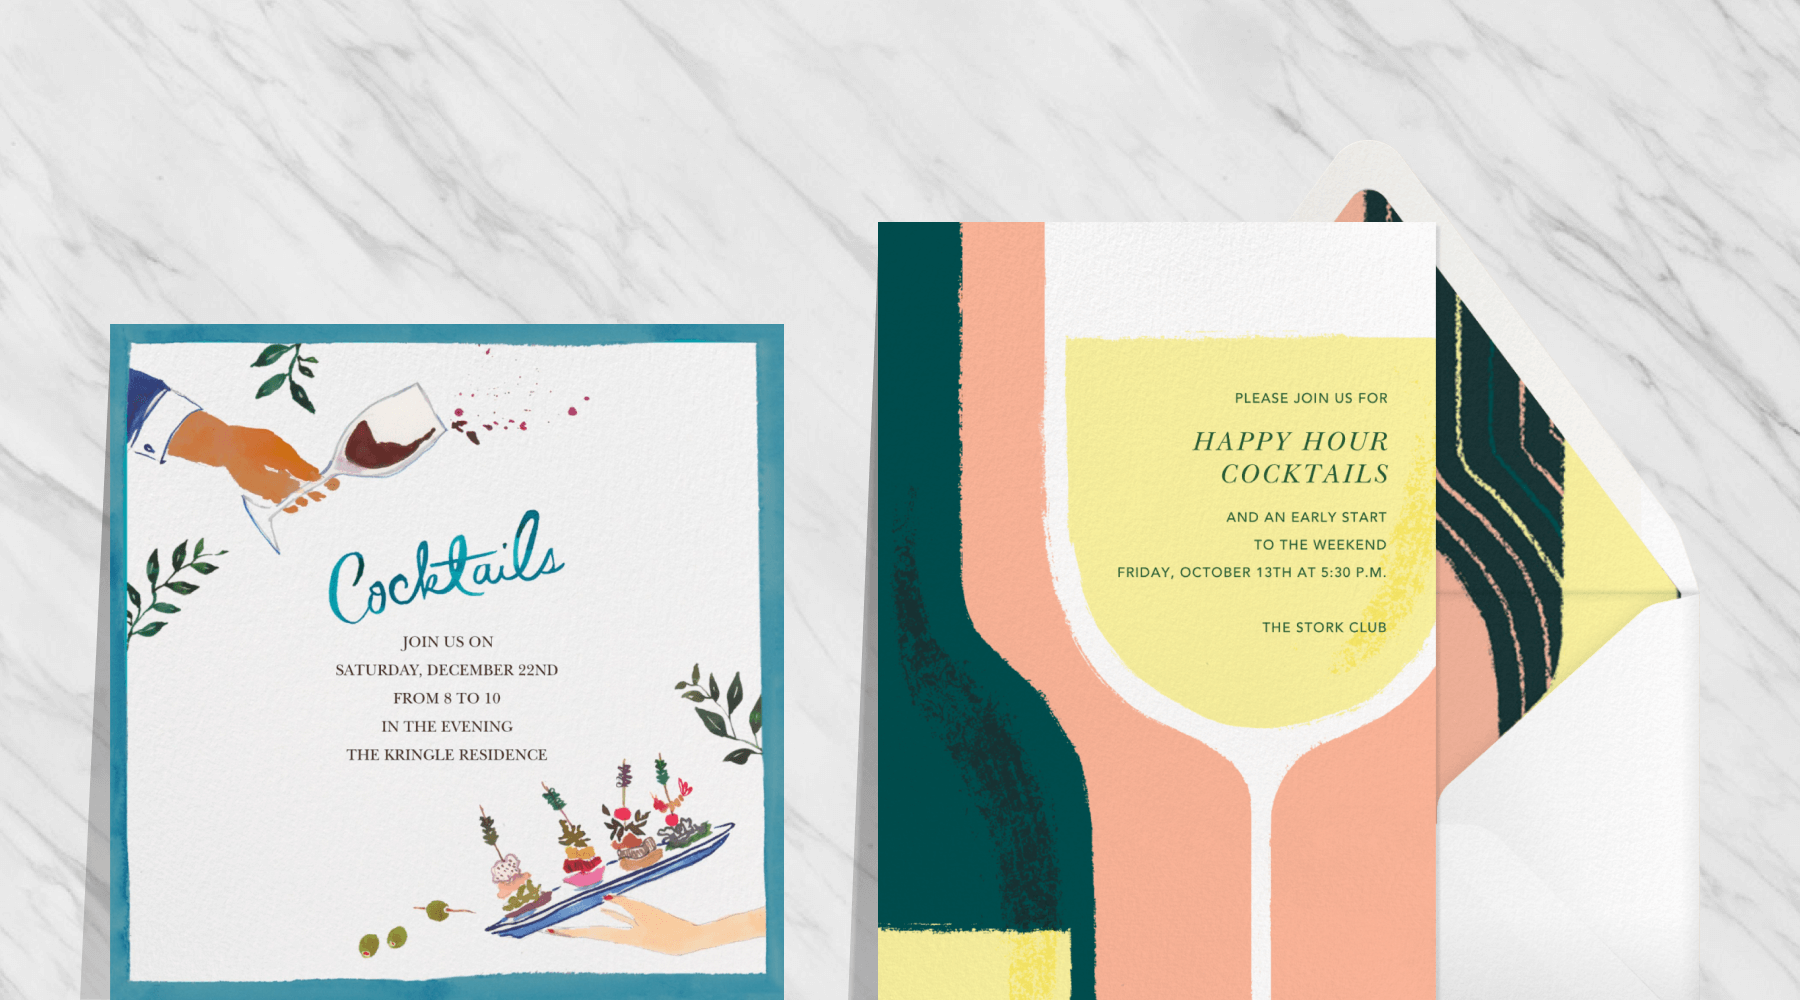 A square invitation with a watercolor illustration of a hand spilling wine from a glass and another hand balancing a tray of hors d'oeuvres; an invitation with an abstract depiction of a large wine glass and green bottle.